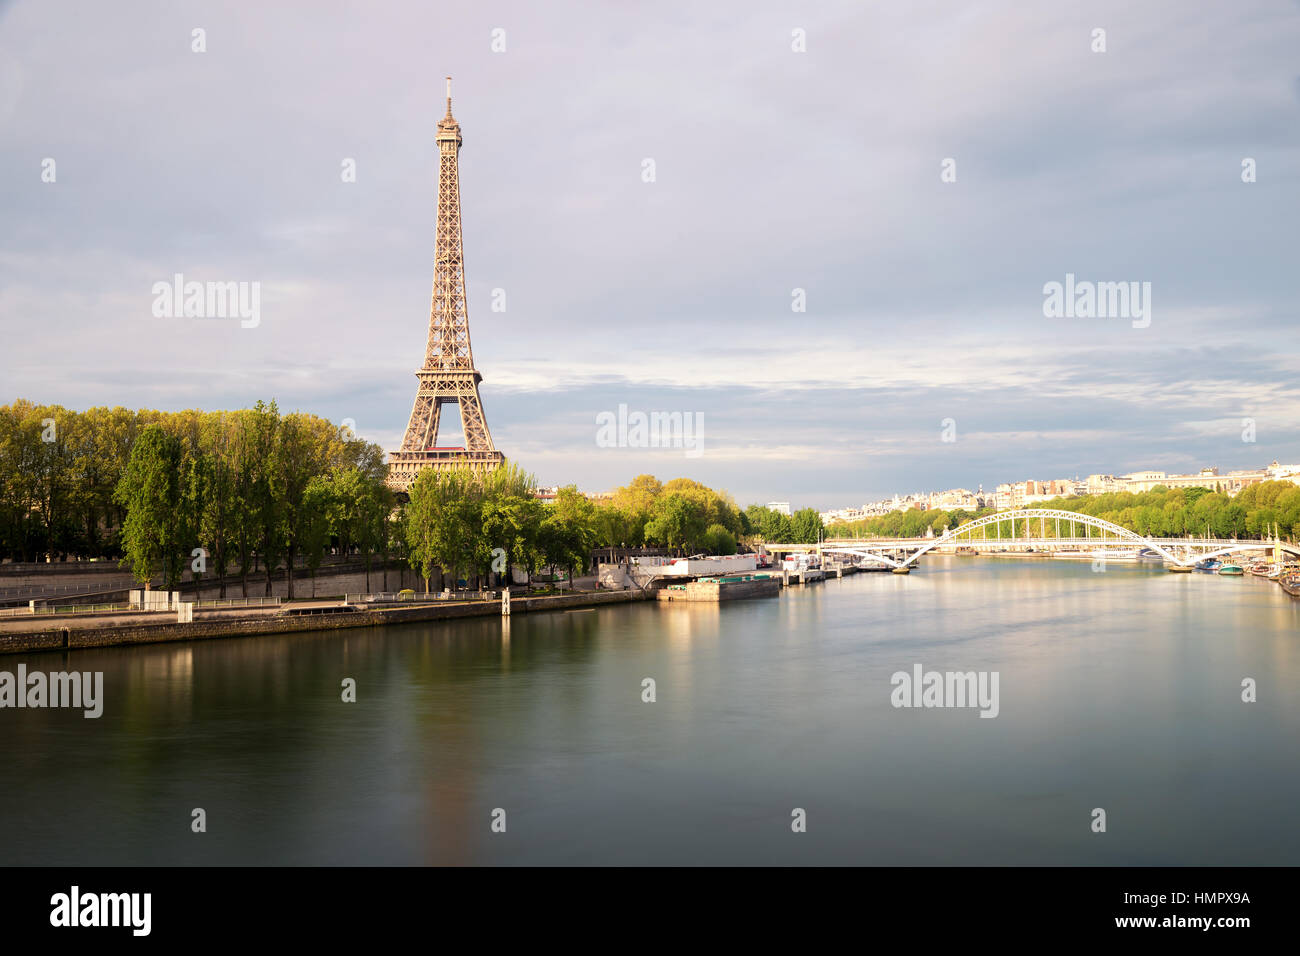 Eiffel tower in Paris from the river Seine in spring season. Paris, France. Stock Photo